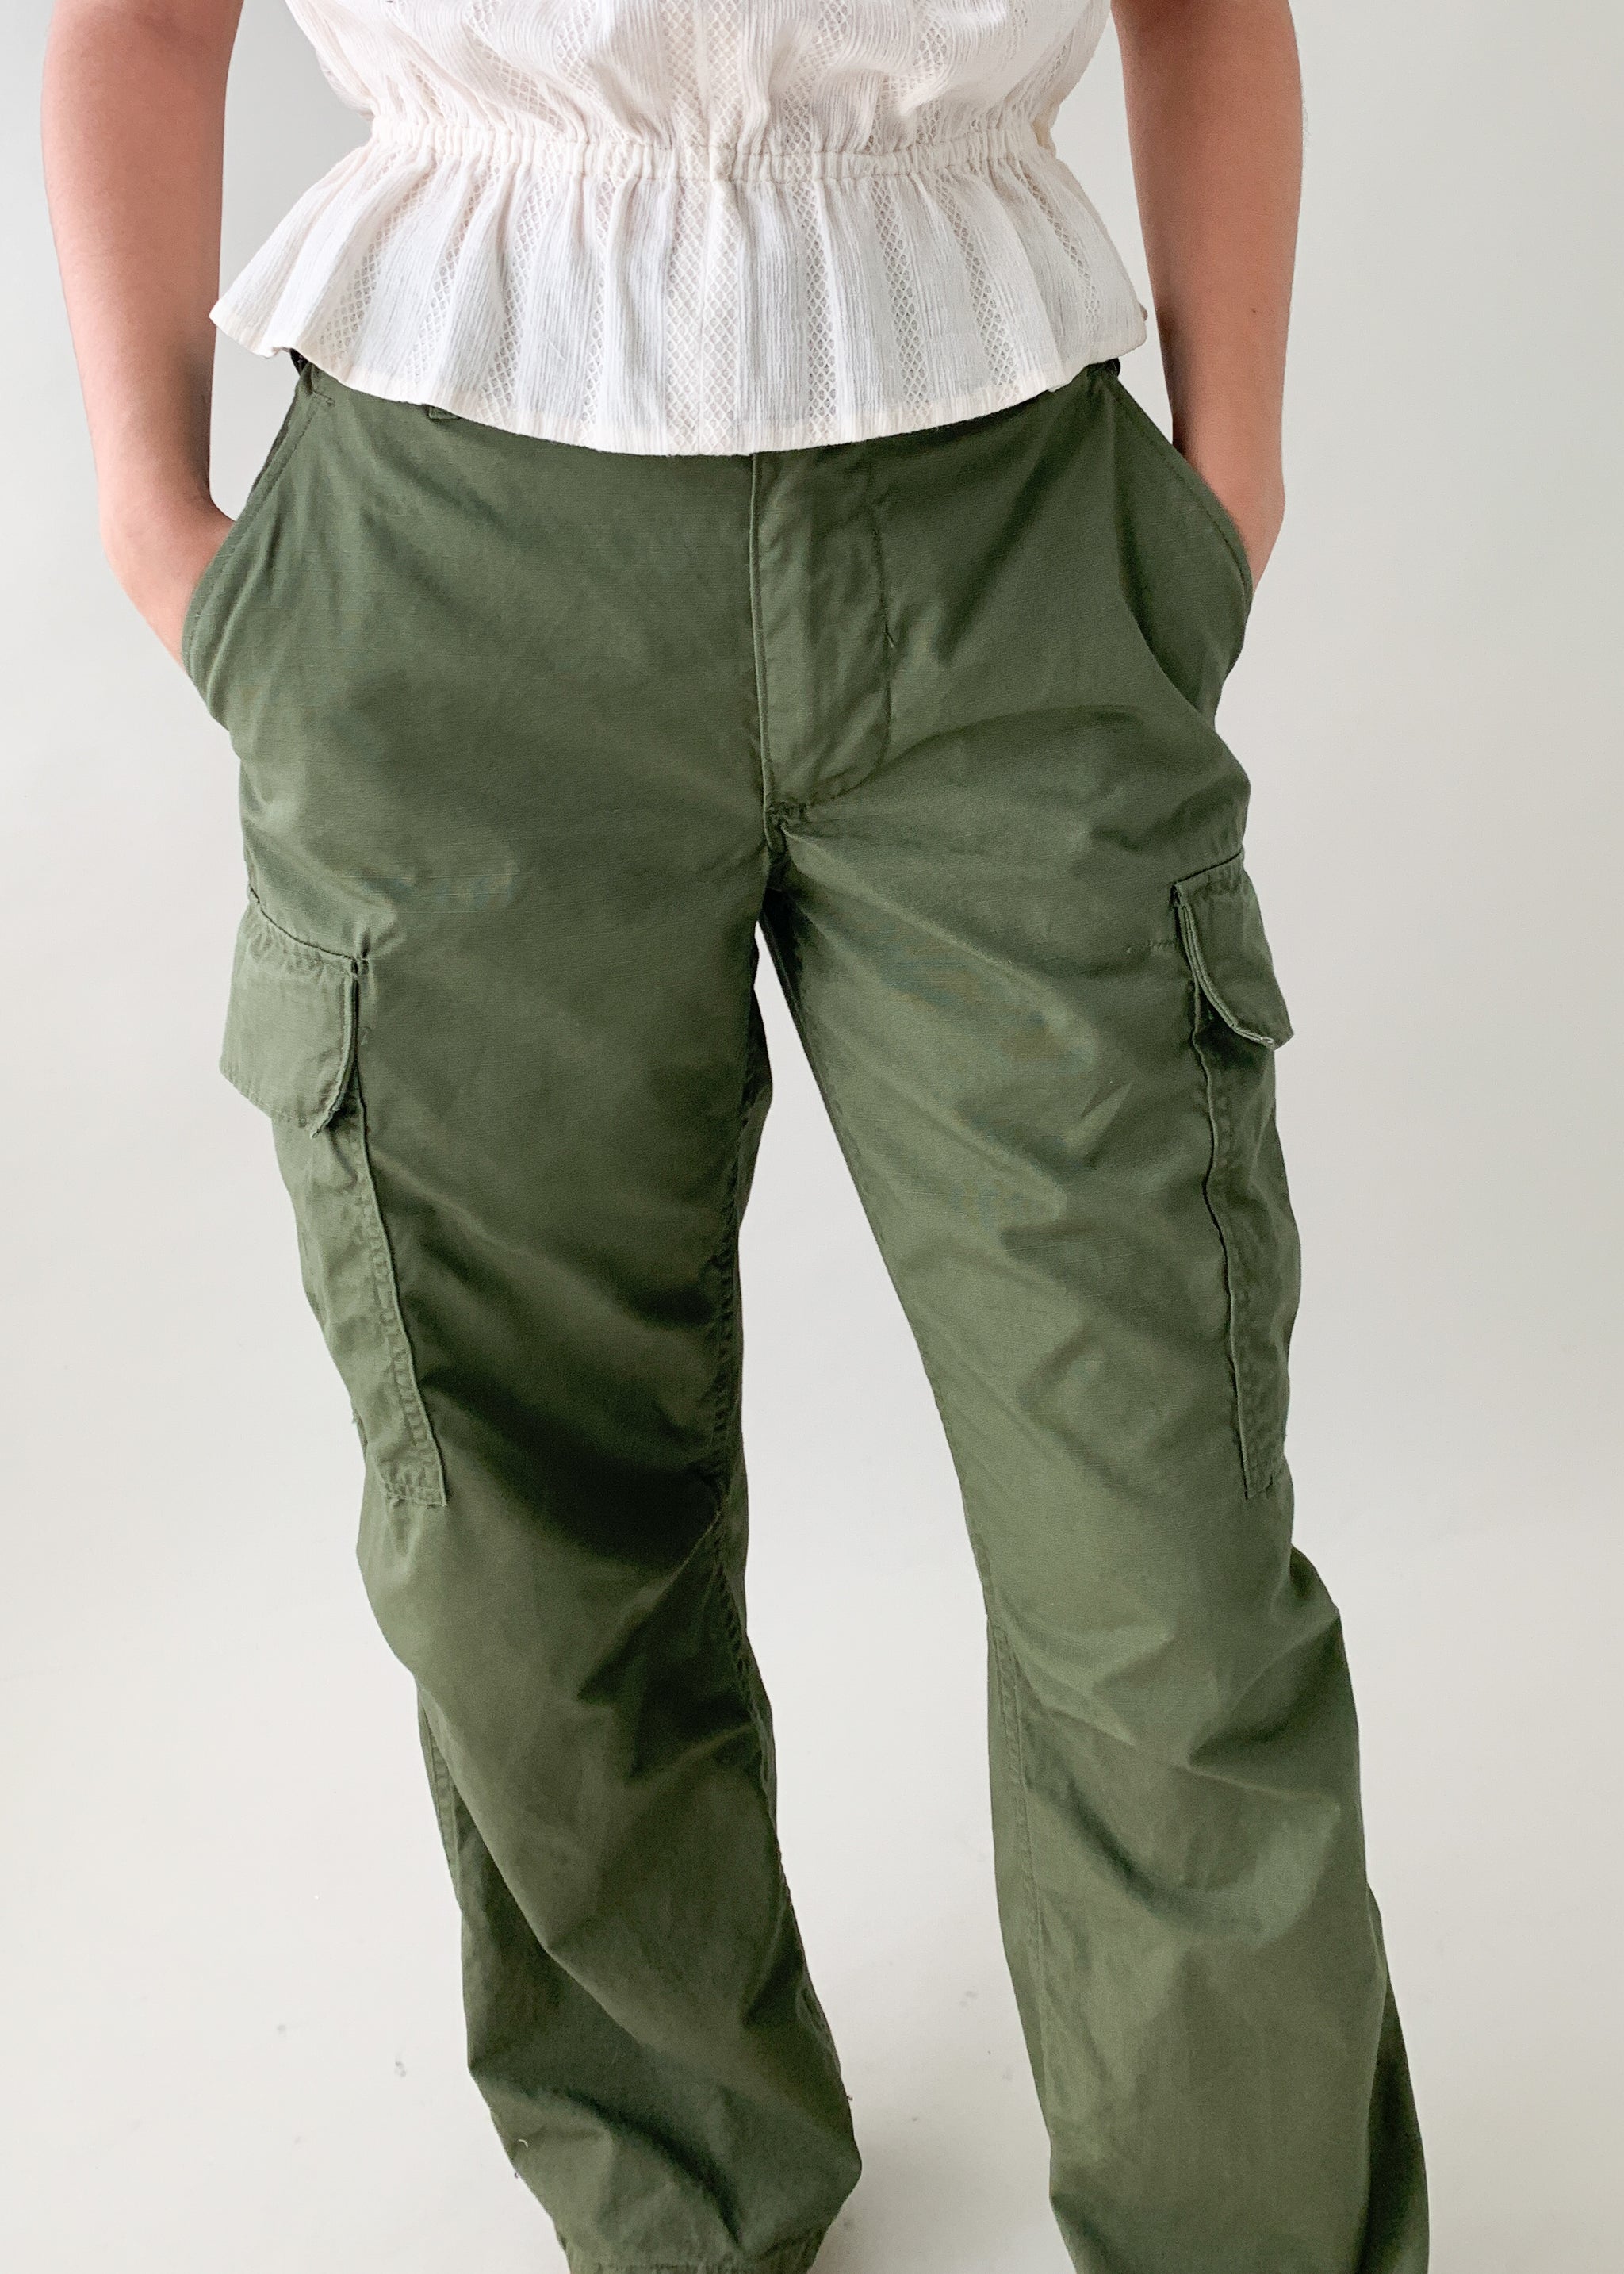 Camouflage Tactical Pants Military Cargo Pants Knee Pad Field Work Combat  Men US Army Pantalon Hunt Ploce Airsoft Trousers LJ201221 From Kong04,  $36.44 | DHgate.Com